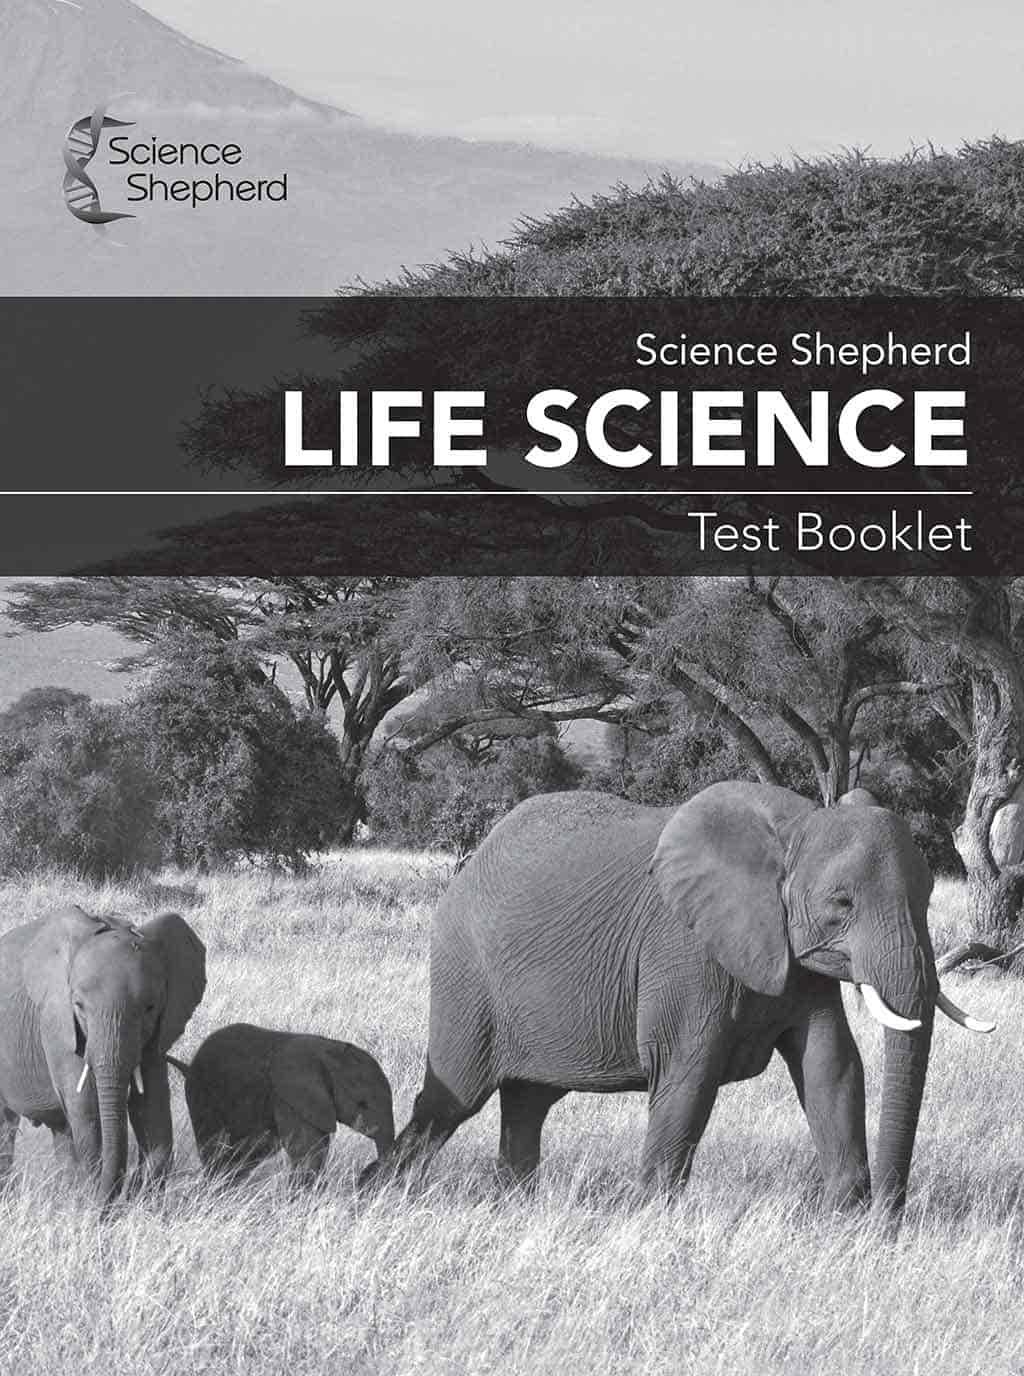 Life Science curriculum for middle school Test Booklet cover of elephants in grayscale